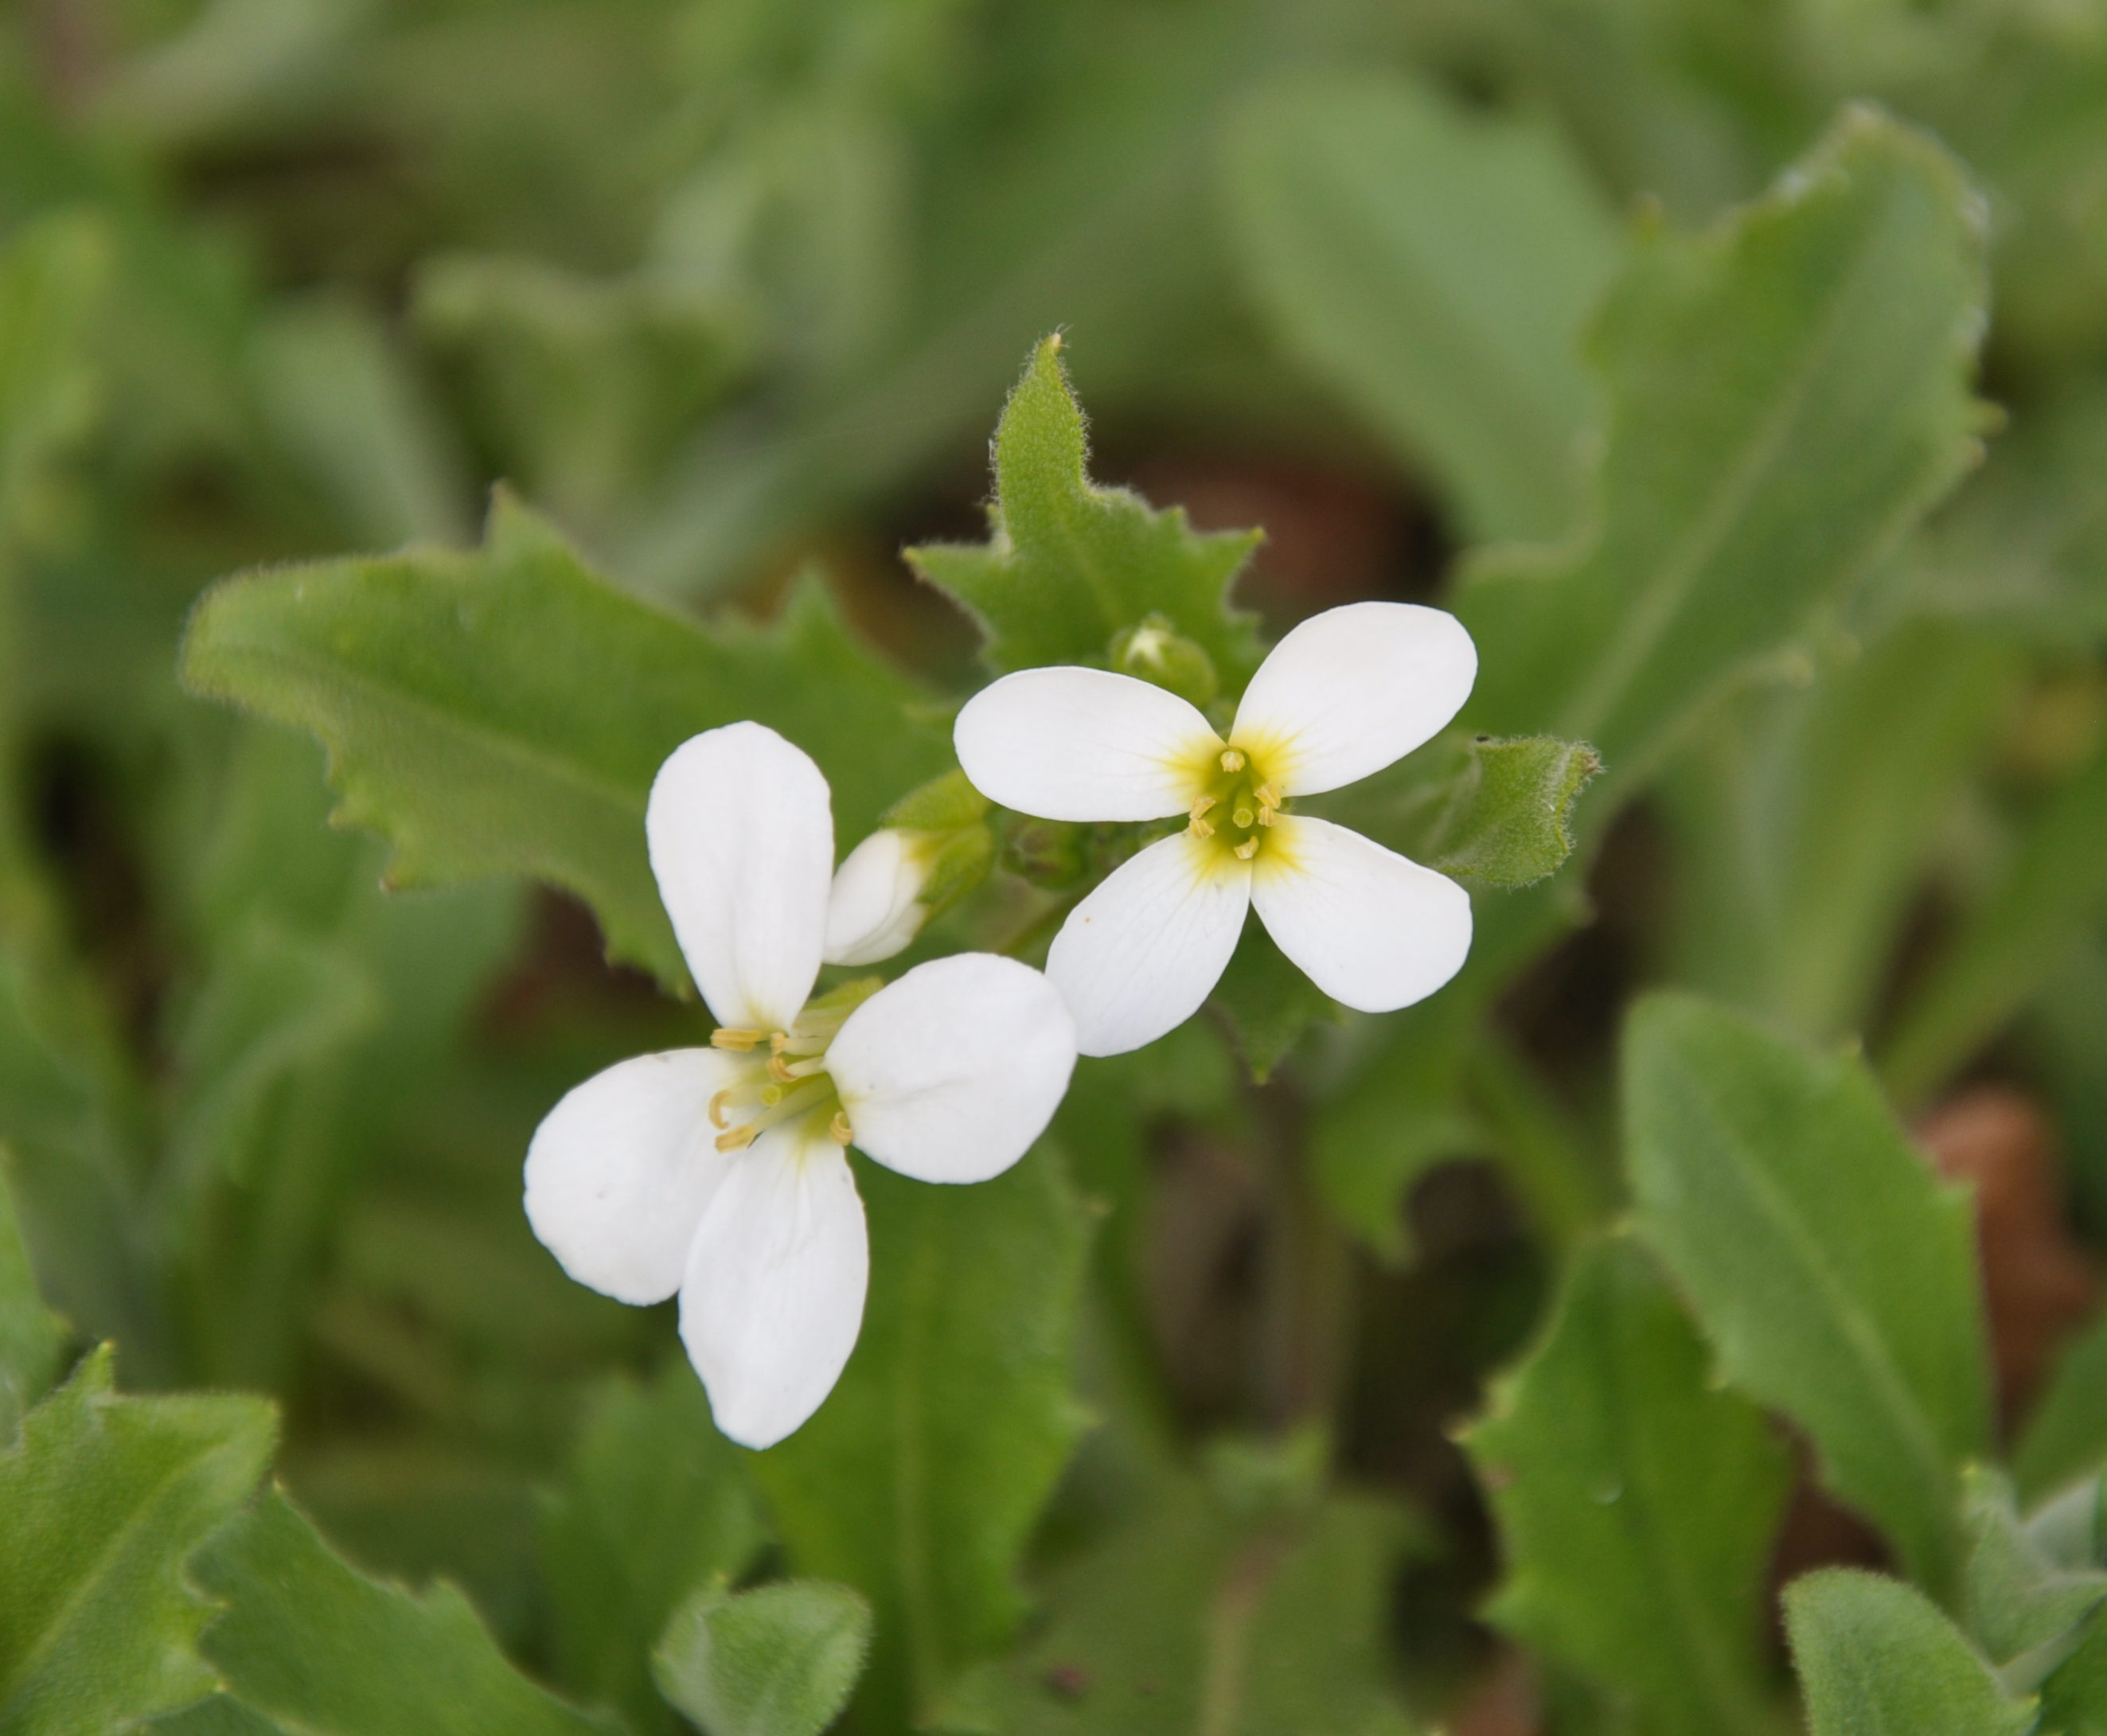 identification - What is this white-flowered ground cover plant ...